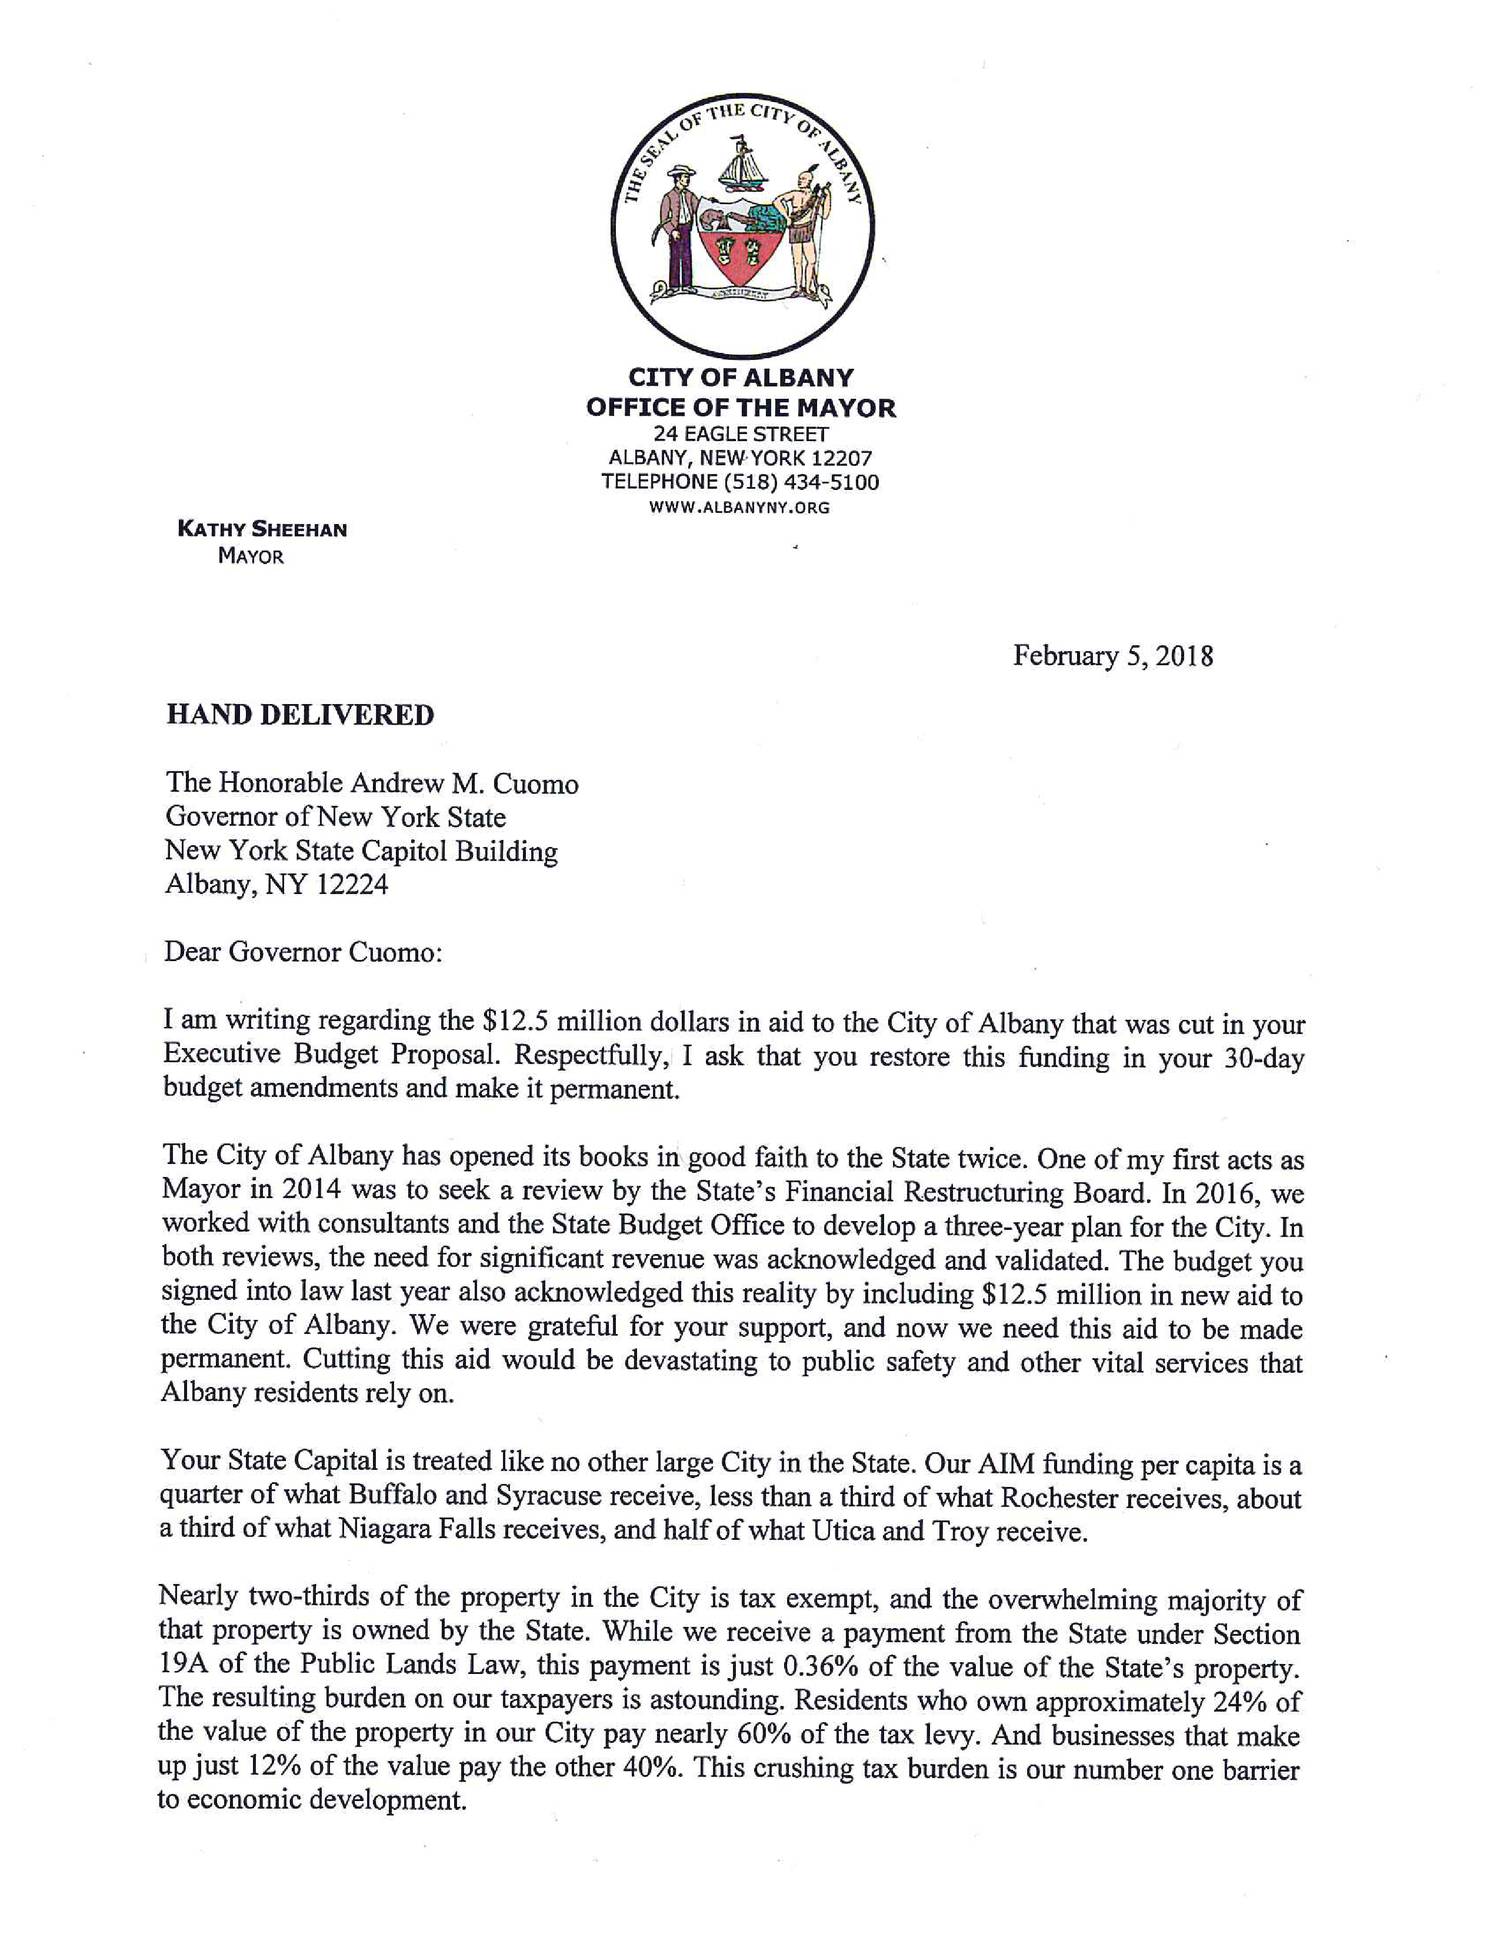 Letter to Governor Cuomo from Mayor Sheehan.pdf  DocDroid